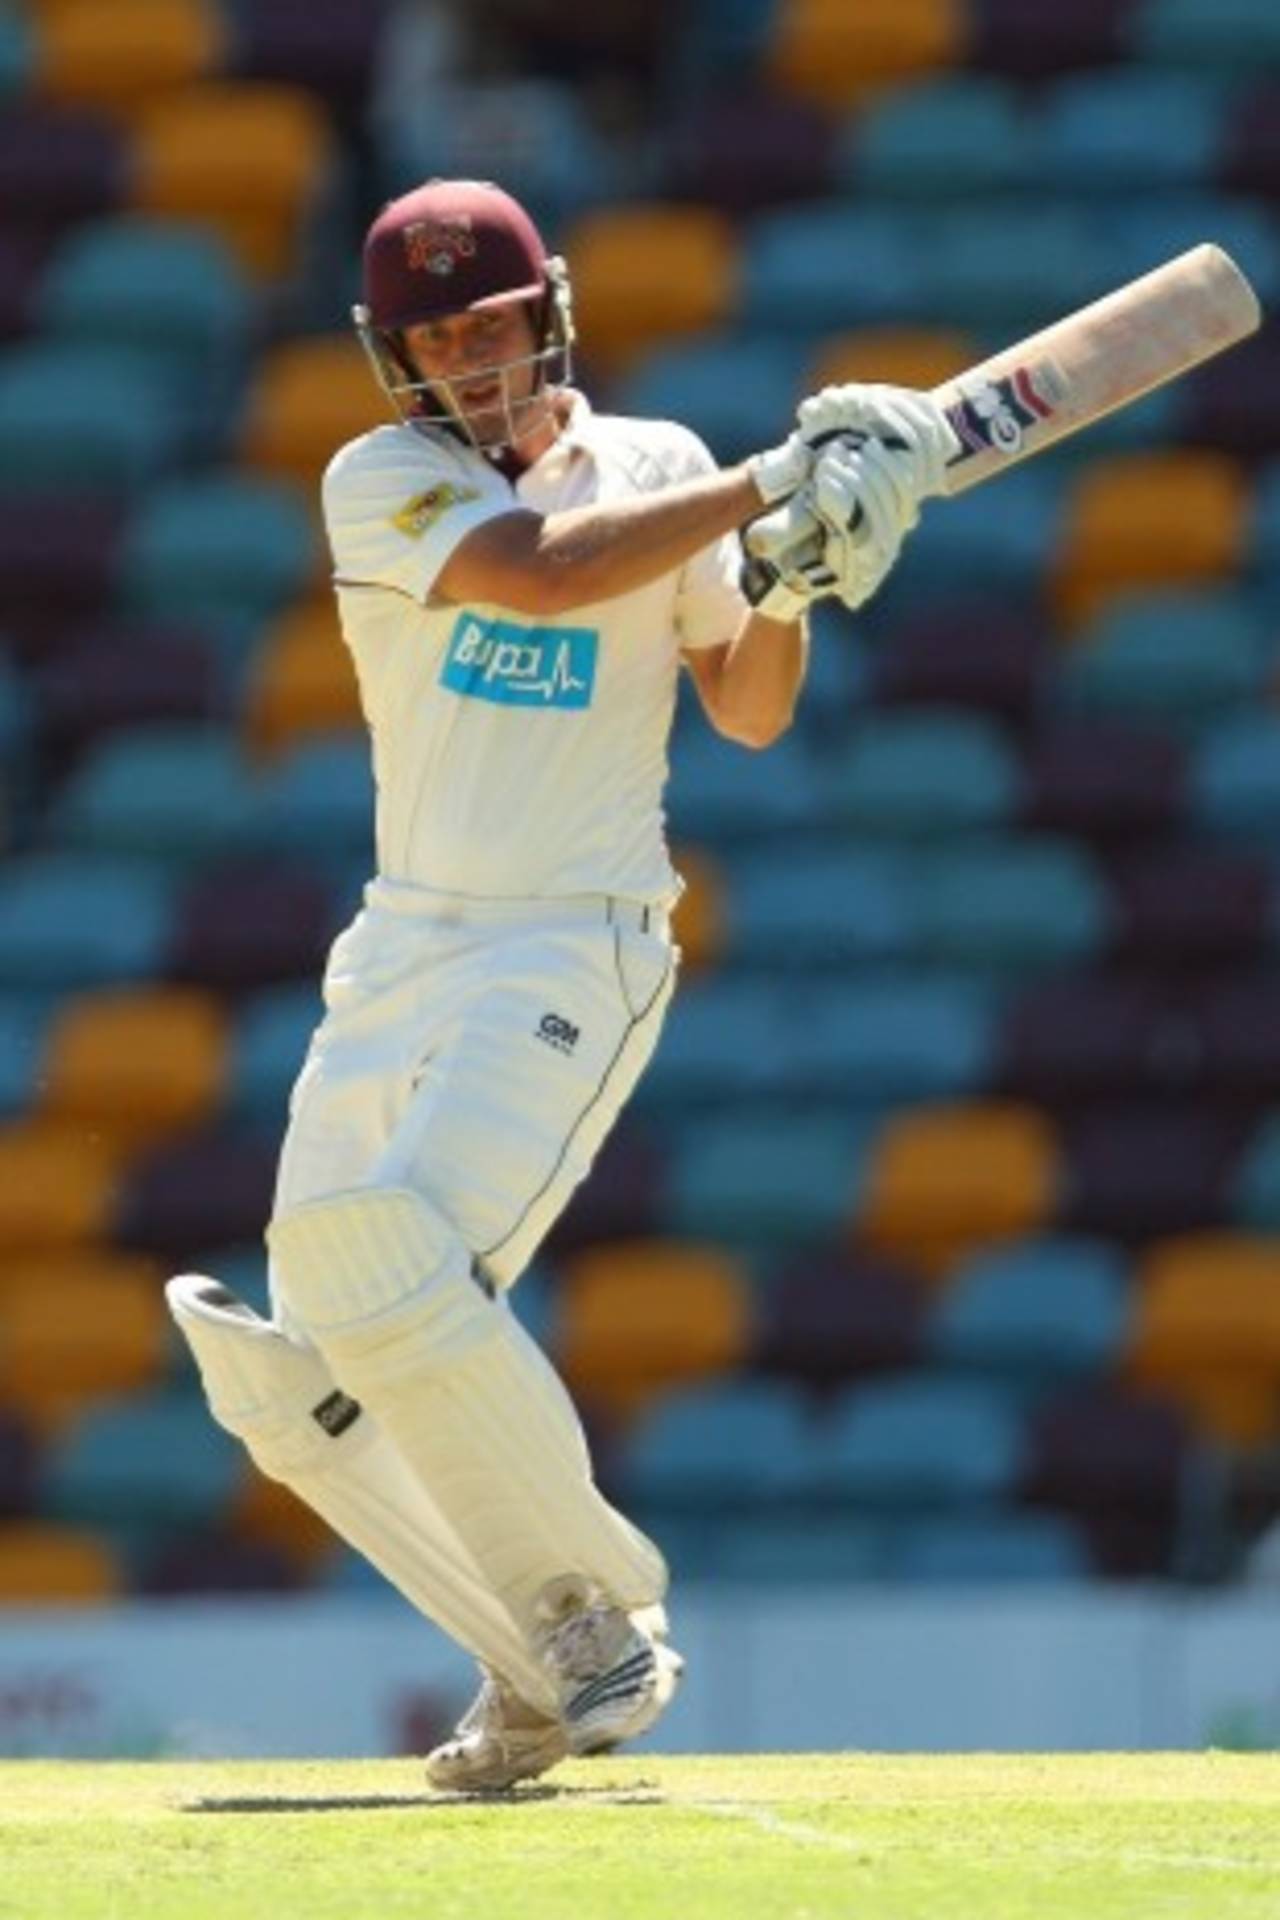 Queensland's Joe Burns is one of the promising young Australian batsmen who has emerged over the past two years&nbsp;&nbsp;&bull;&nbsp;&nbsp;Getty Images